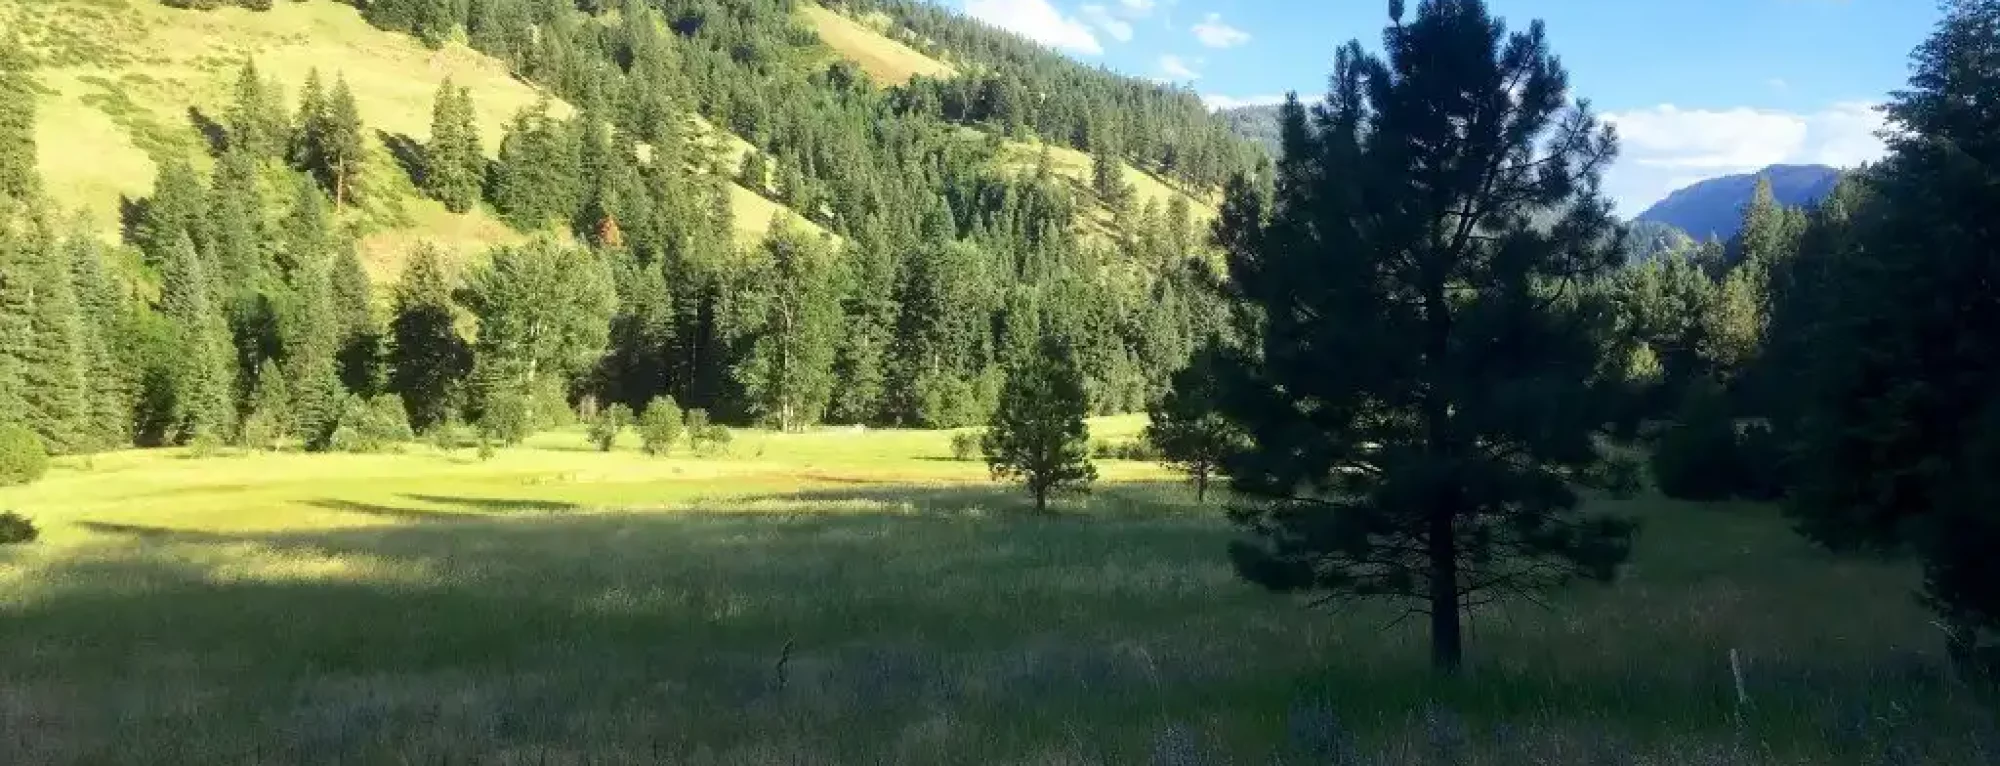 lostine-river-timber-tract-for-sale-wallowa-county-oregon11